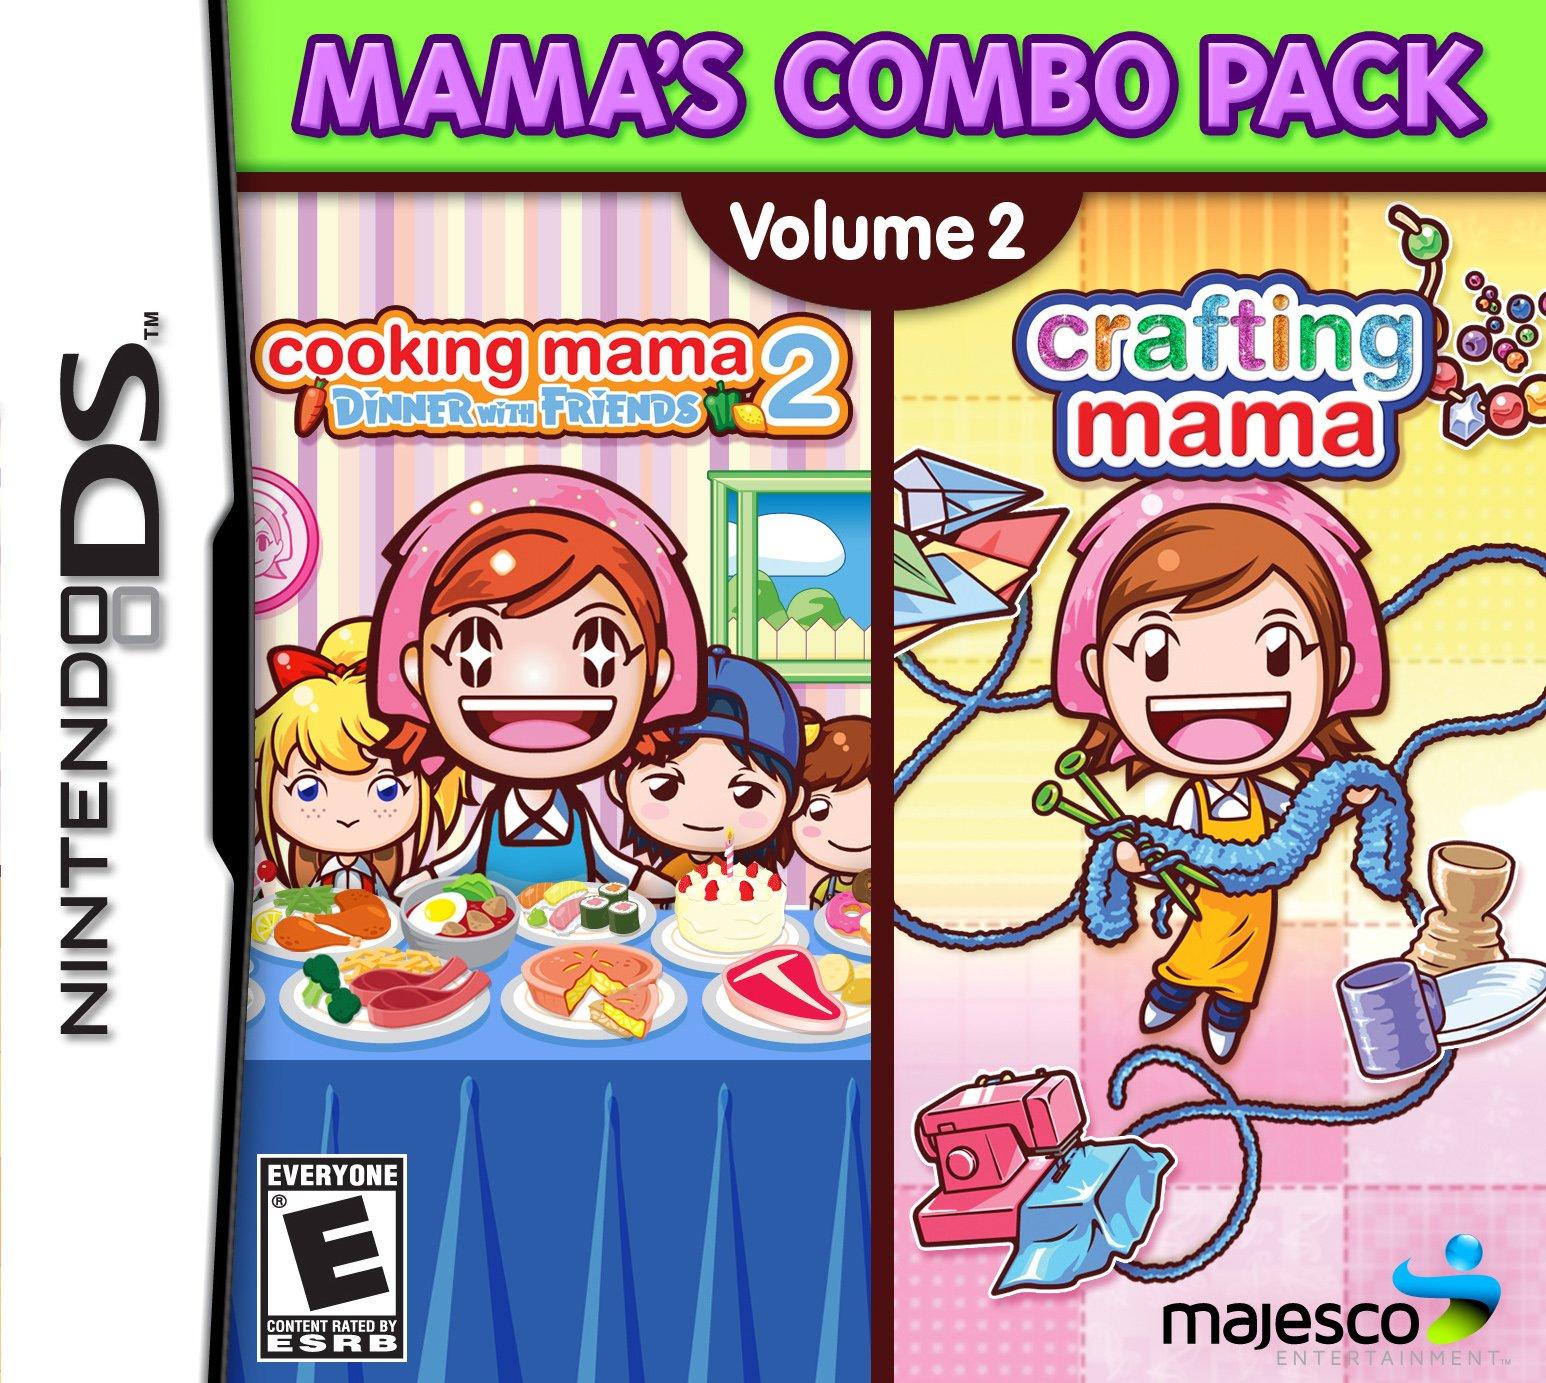 Cooking Mama's Combo Pack Volume 2 - Nintendo DS